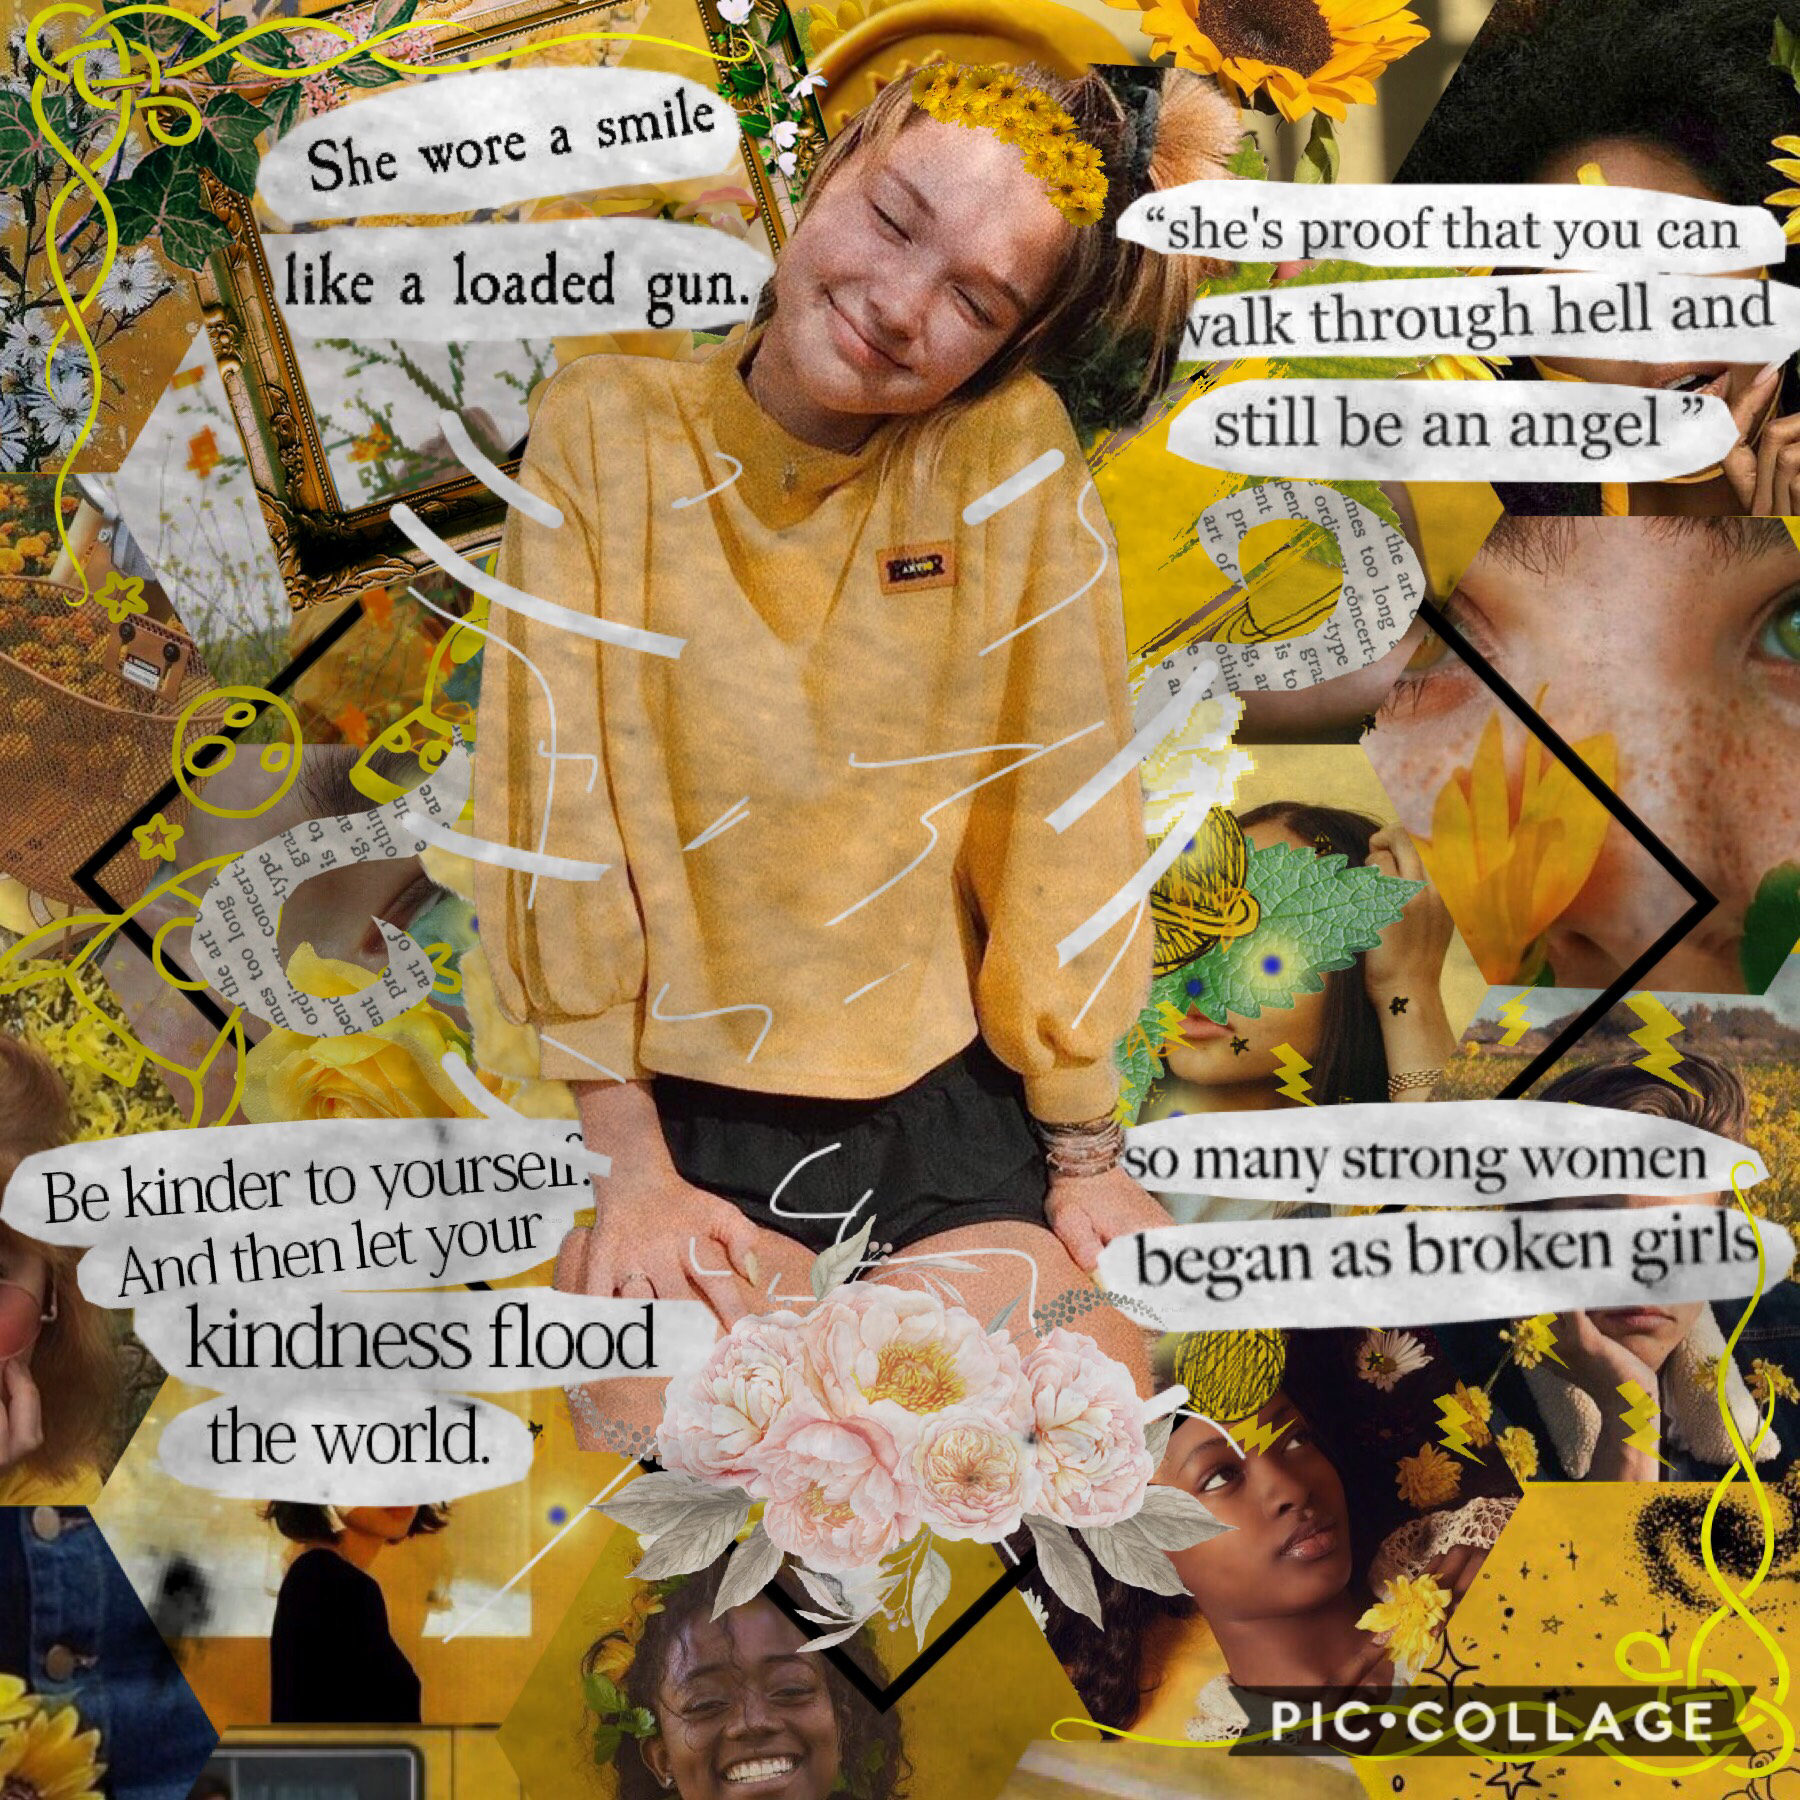 heyo guys, a posted a collage yesterday but it turned out to be pending review so I had to remake the collage with a different girl and use different quote and stuff. ugh it was a trek! anyway hope you like this ✨ text inspired by OceansBlue! 
QOTD: fav m